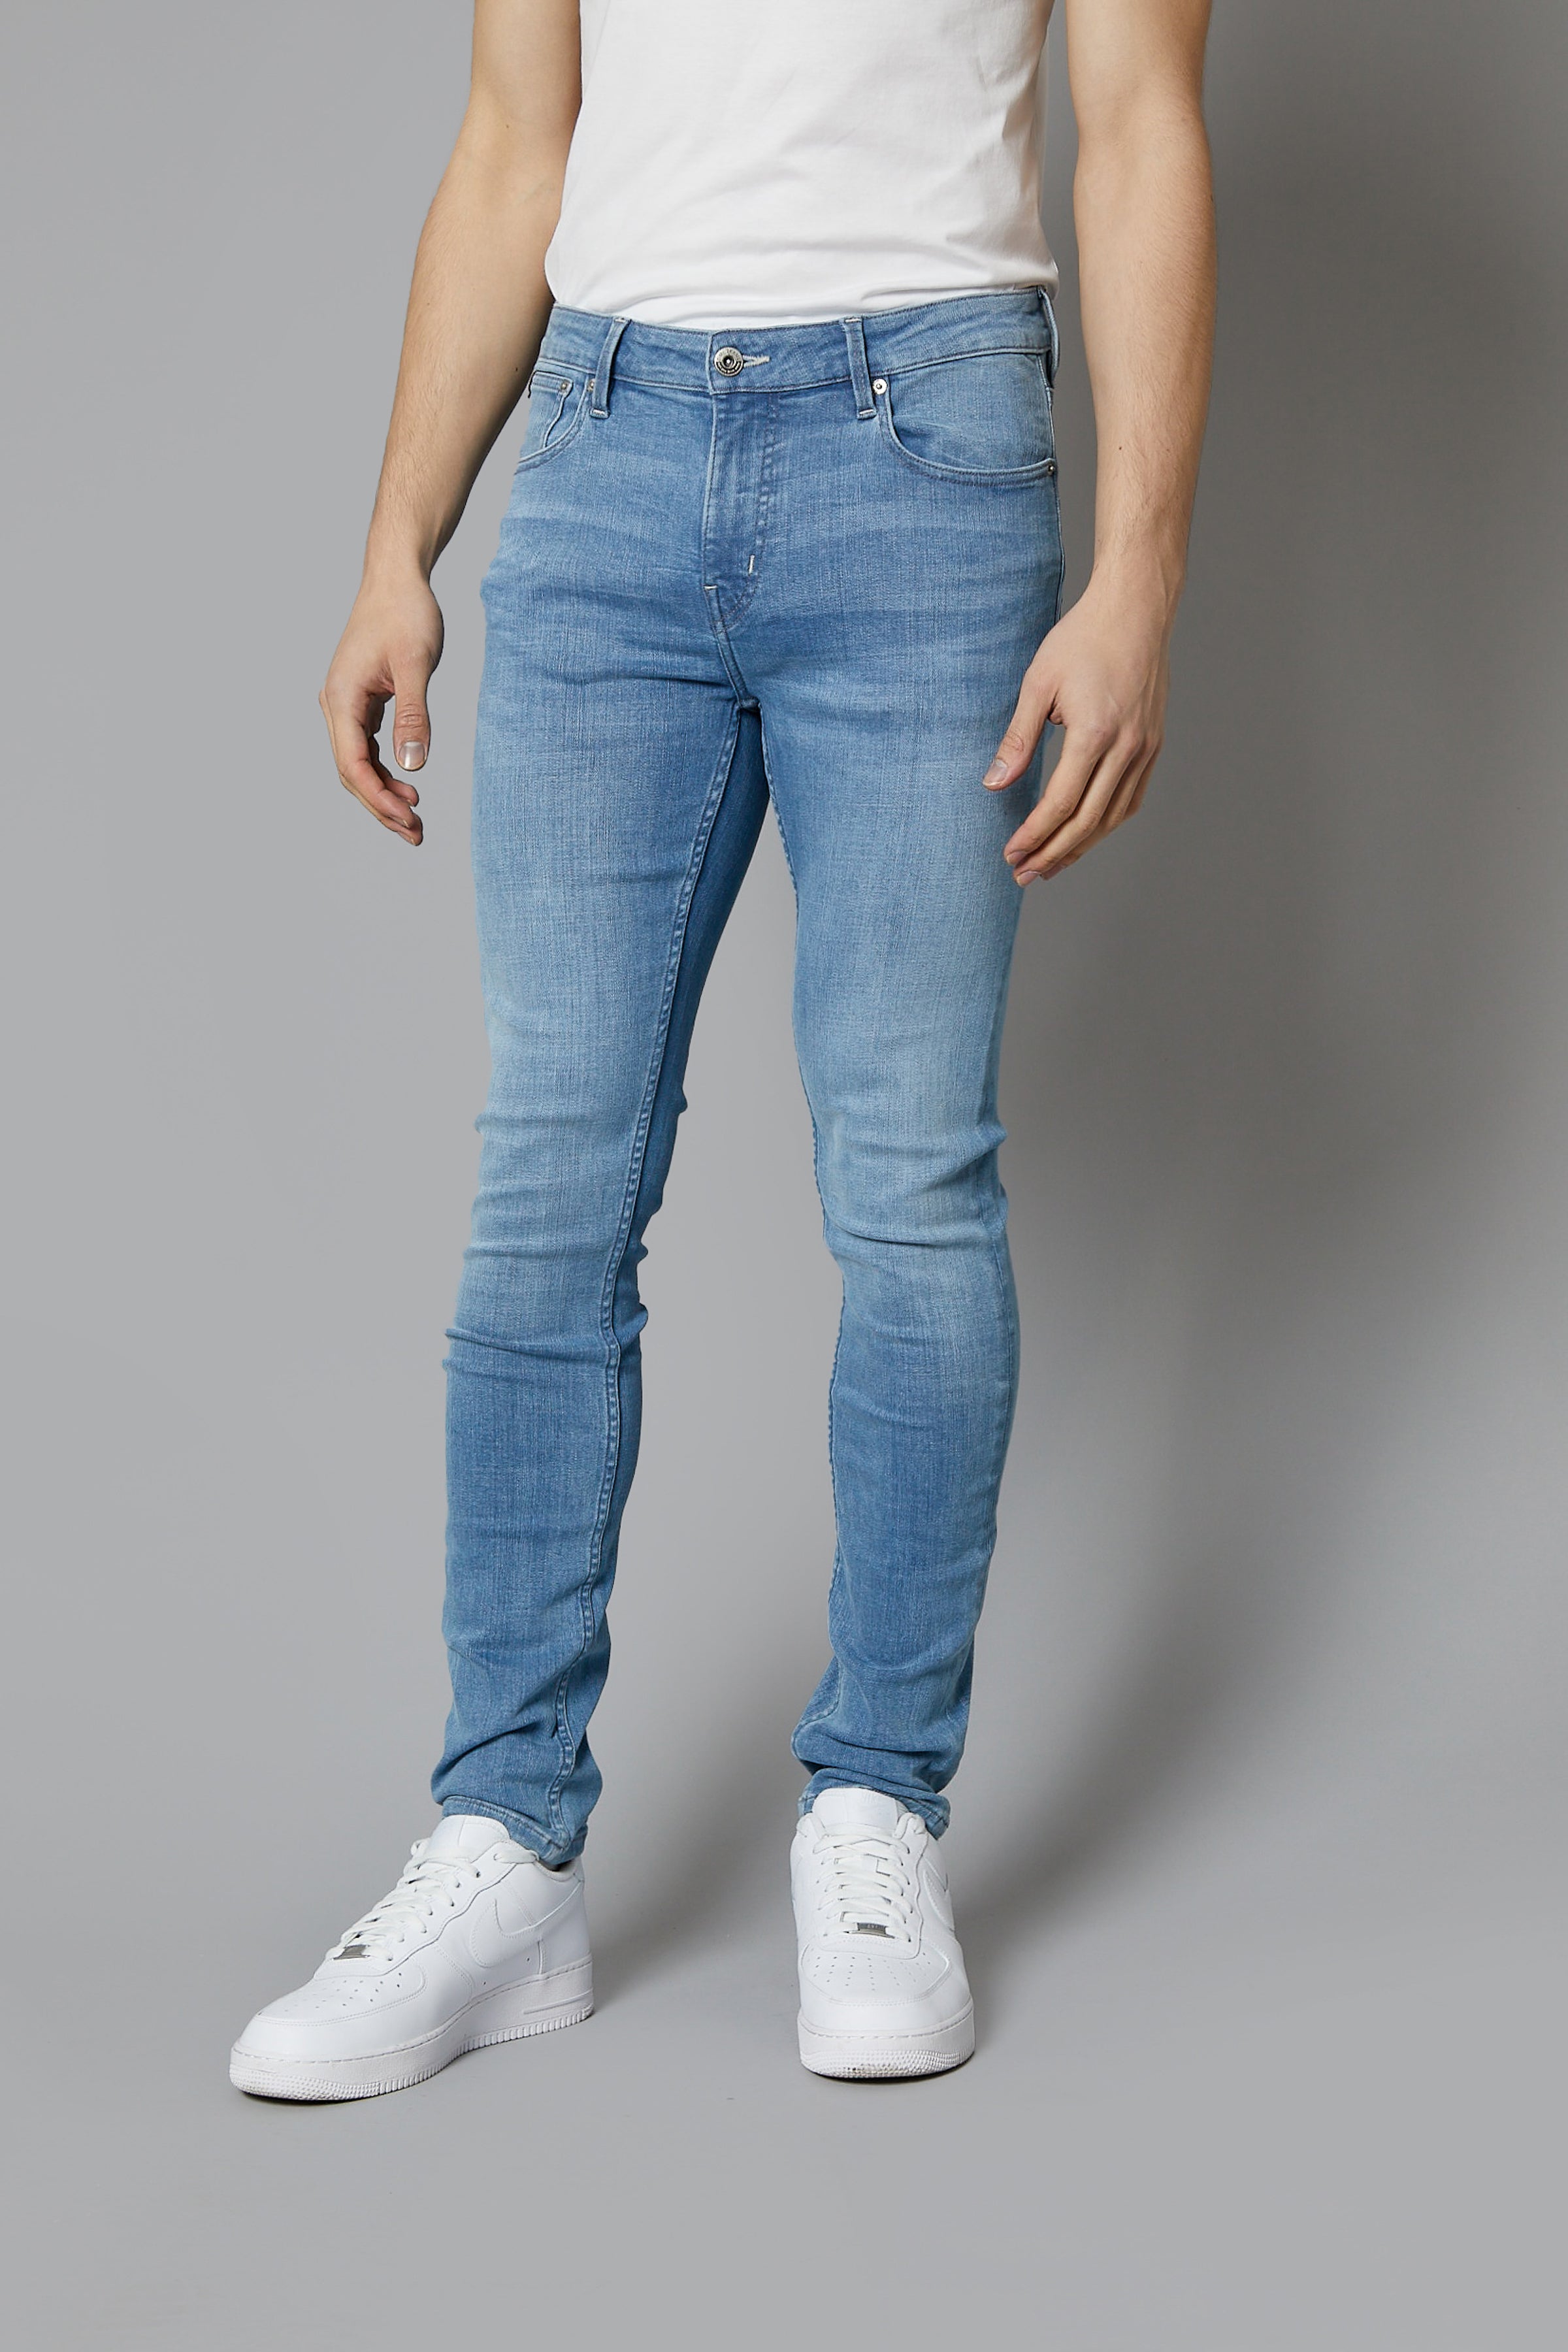 Denim Jeans for Men | Bodybuilding Fitness & Casual Wear | Jed North